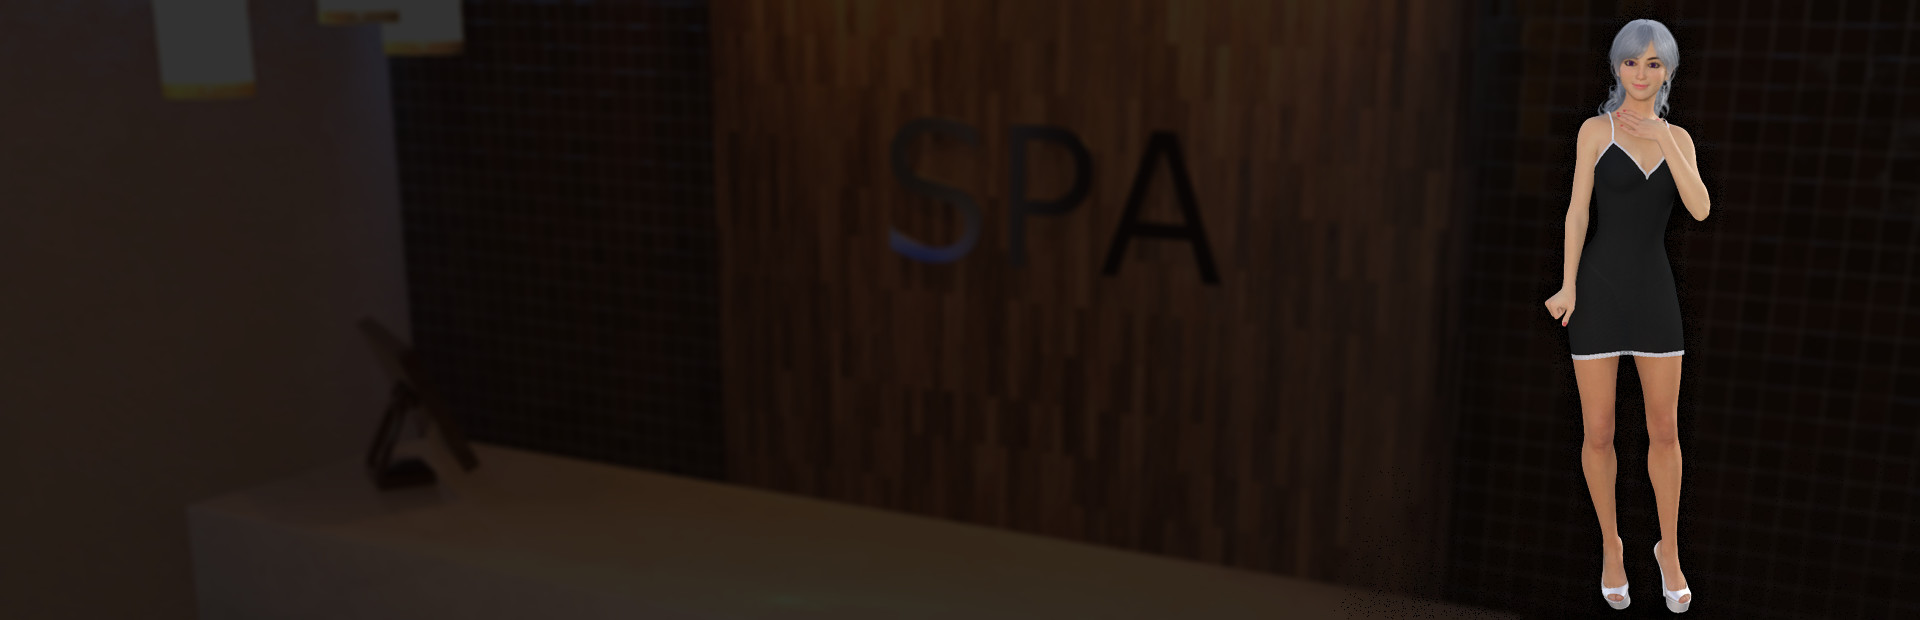 Sex Adventures - The SPA cover image